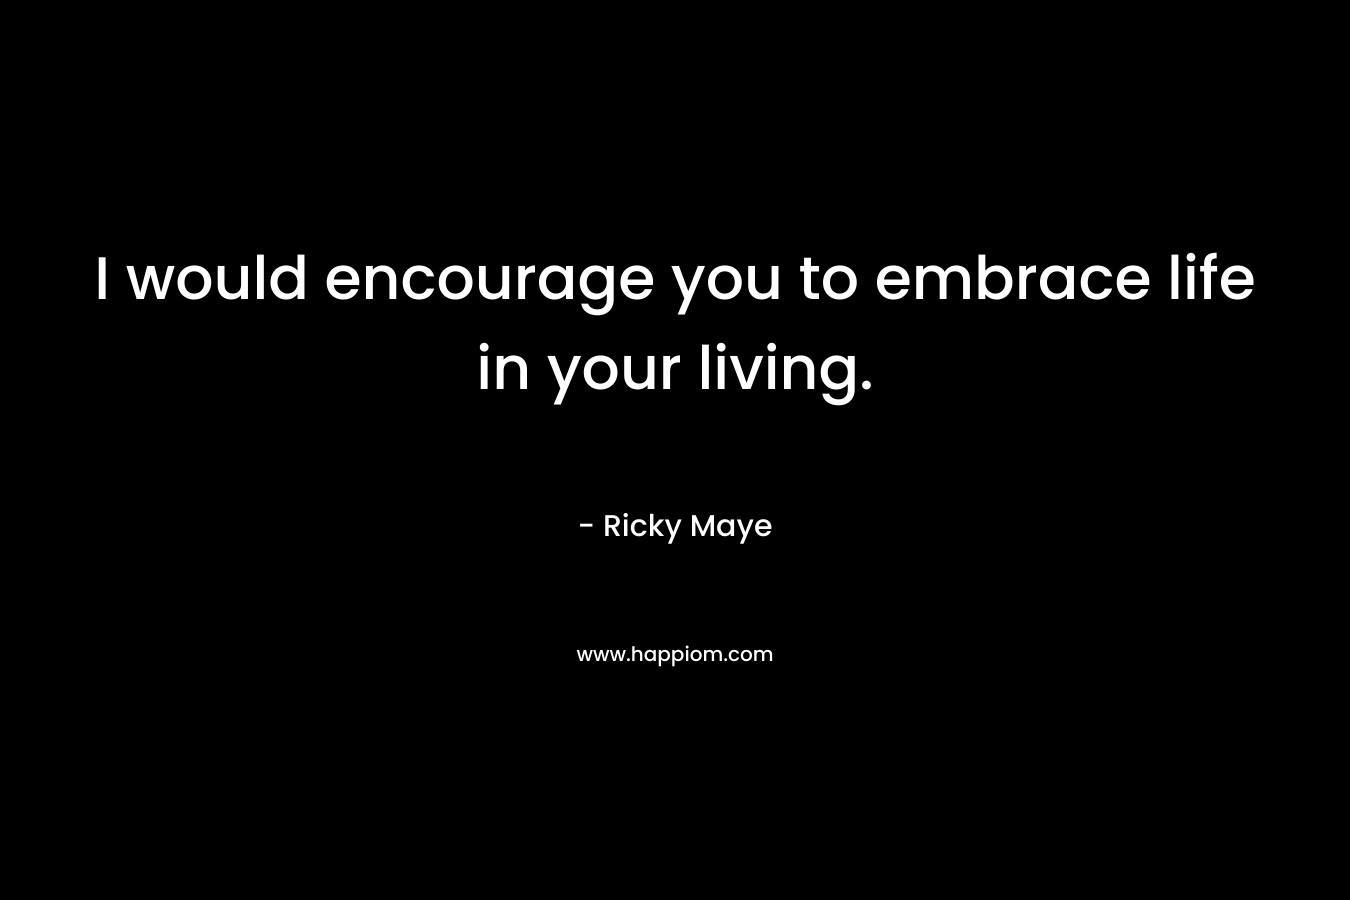 I would encourage you to embrace life in your living.